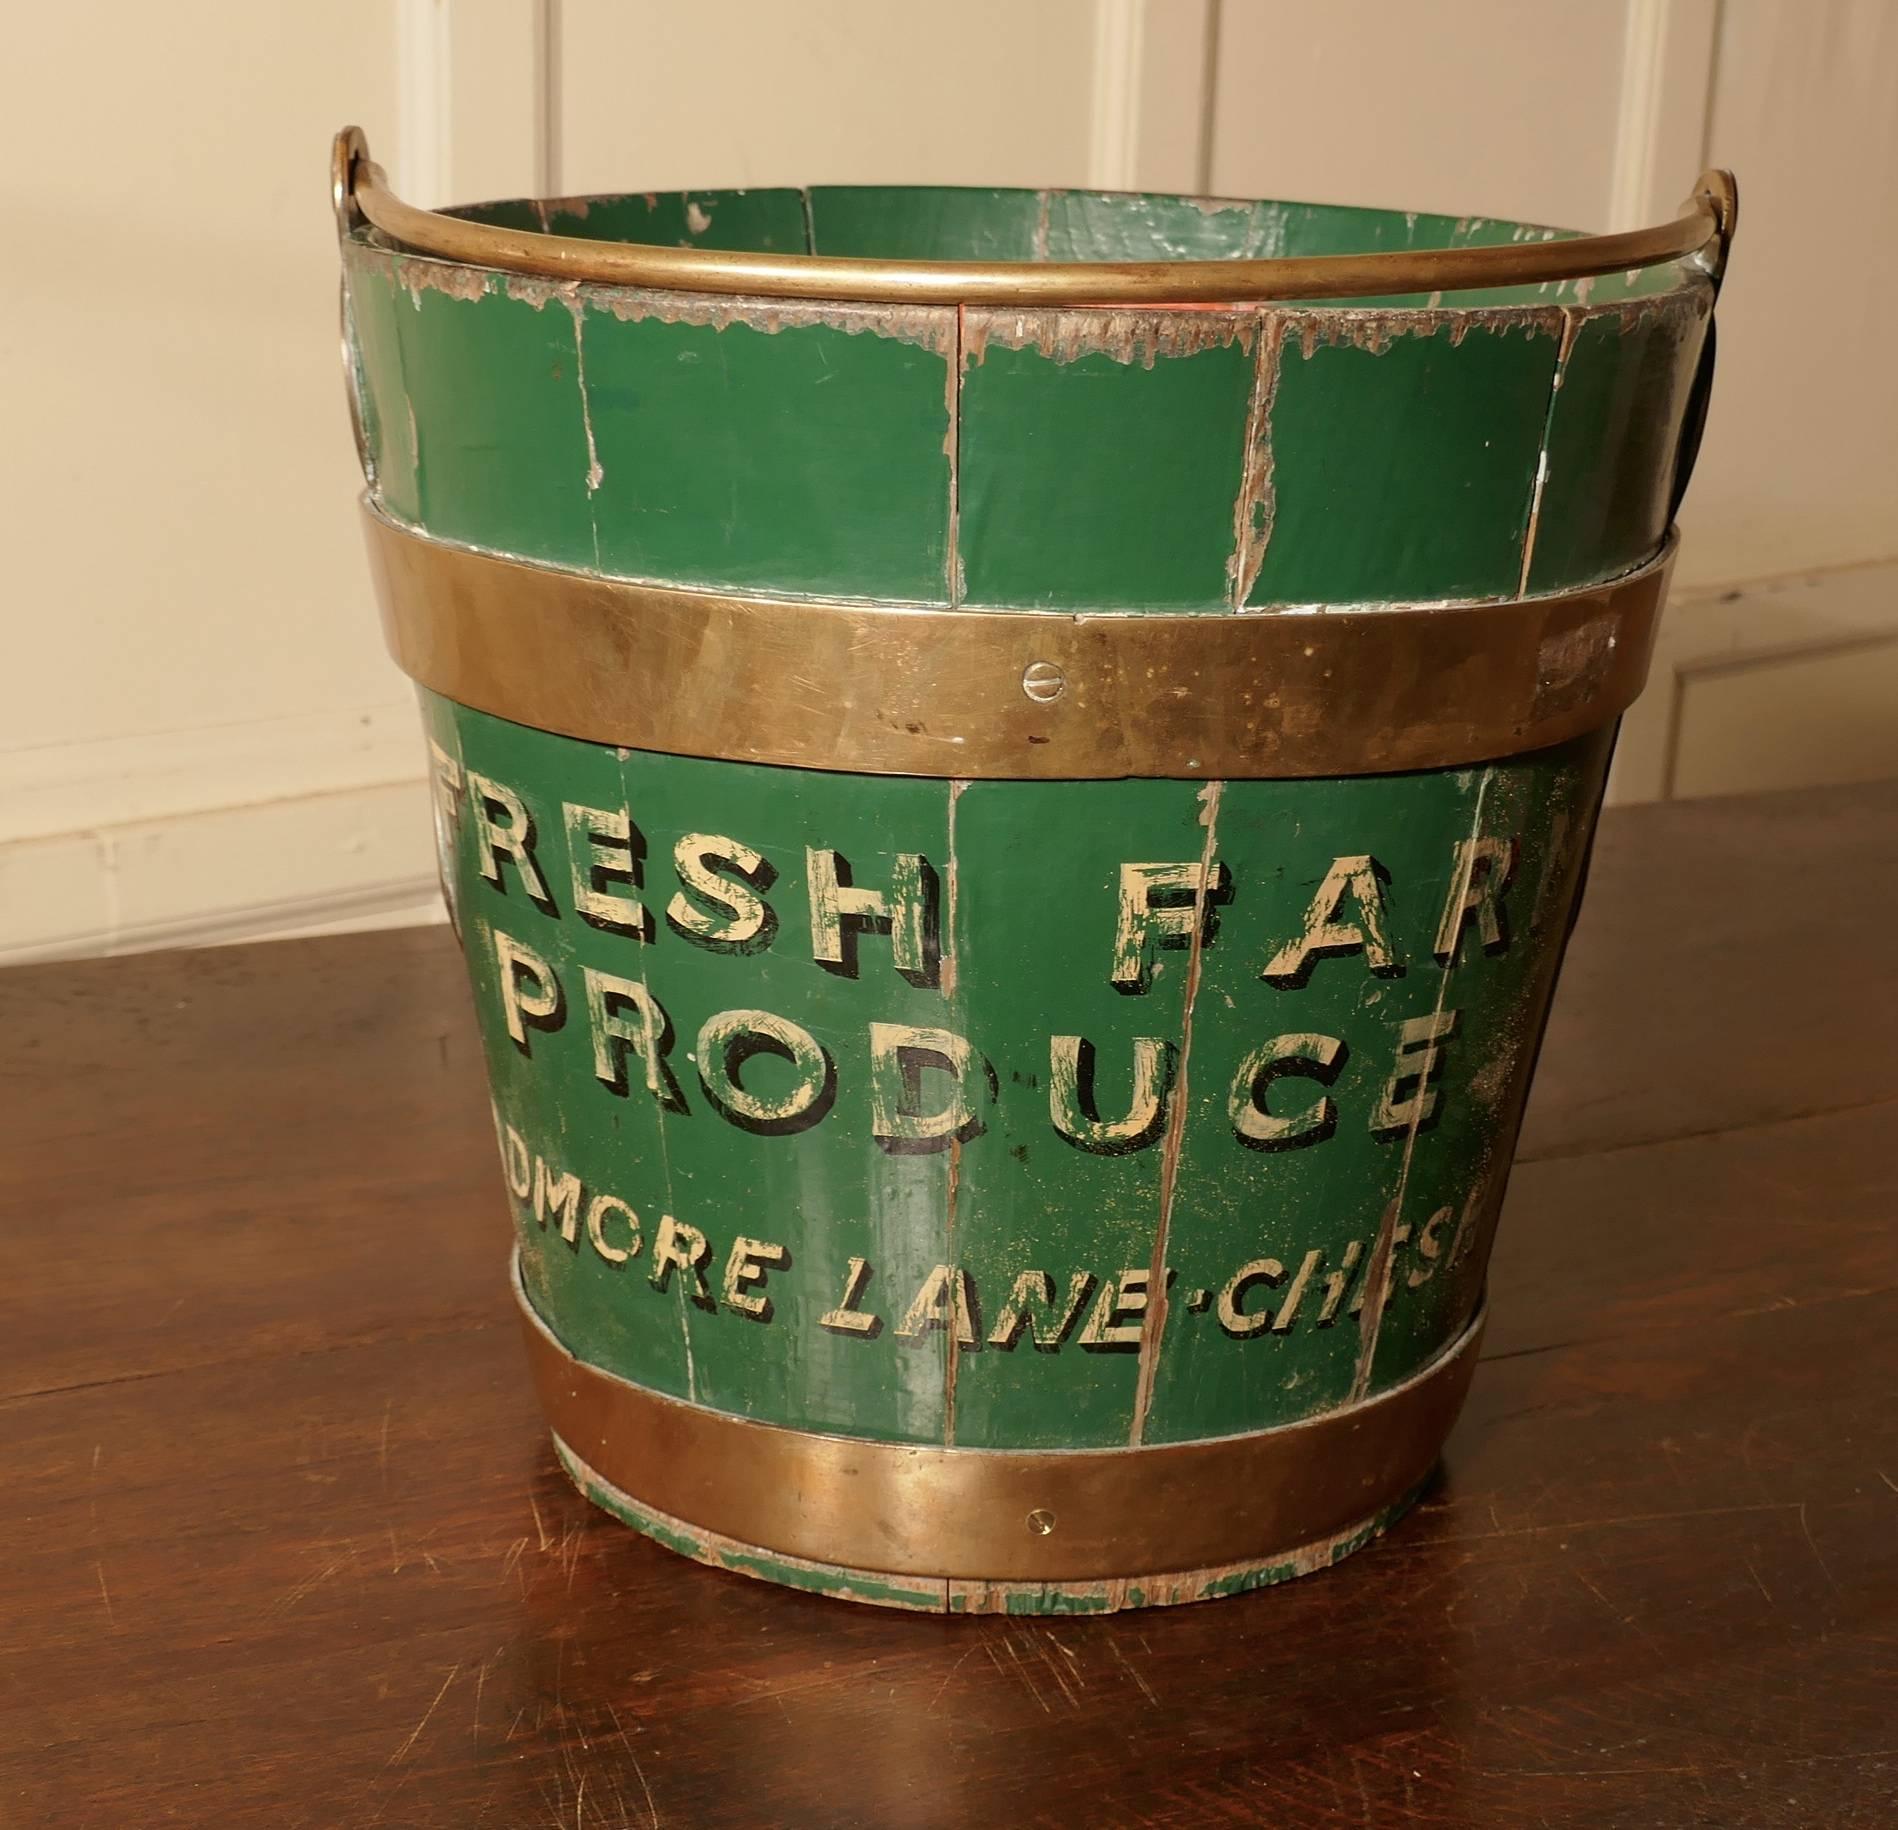 A 19th century painted and brass dairy bucket or milk pail

A delightful piece of rural history, brightly painted in green with a red interior, on the outside we have the owners name “Cheshut dairies”
This is coopered pail brass of strong quality